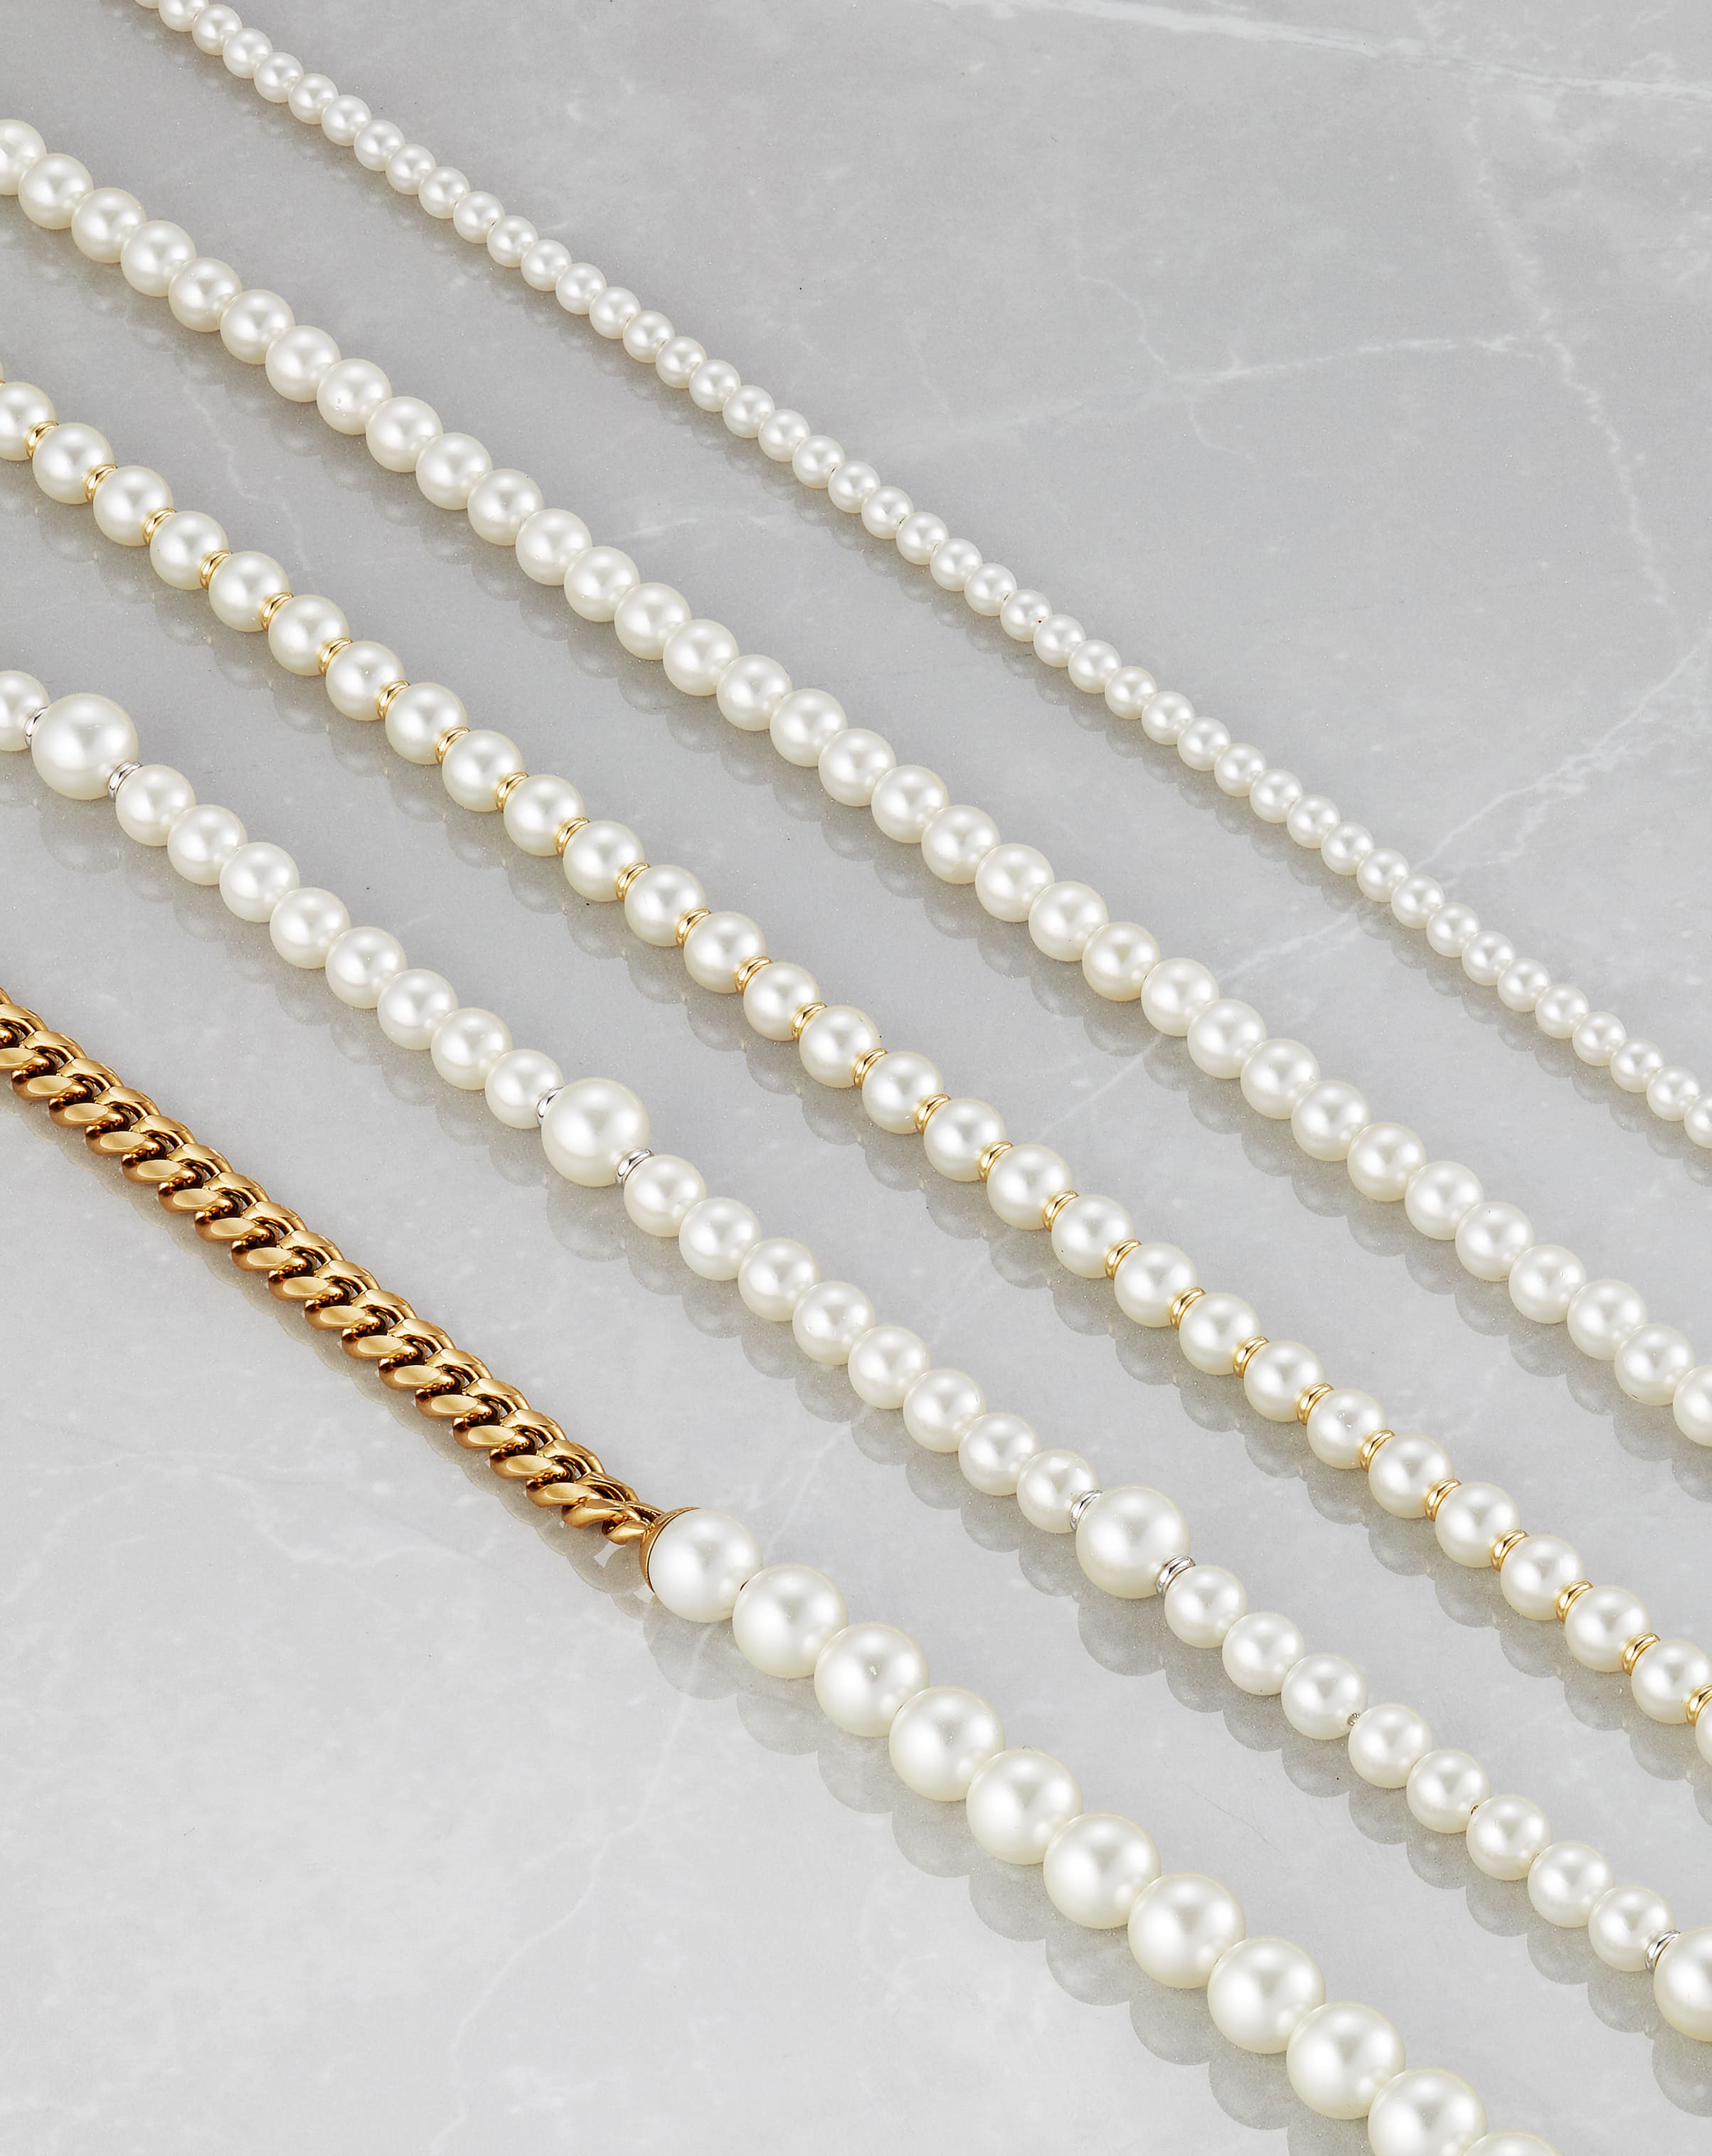 Image Men's Pearl Necklaces - Higher Quality Standards